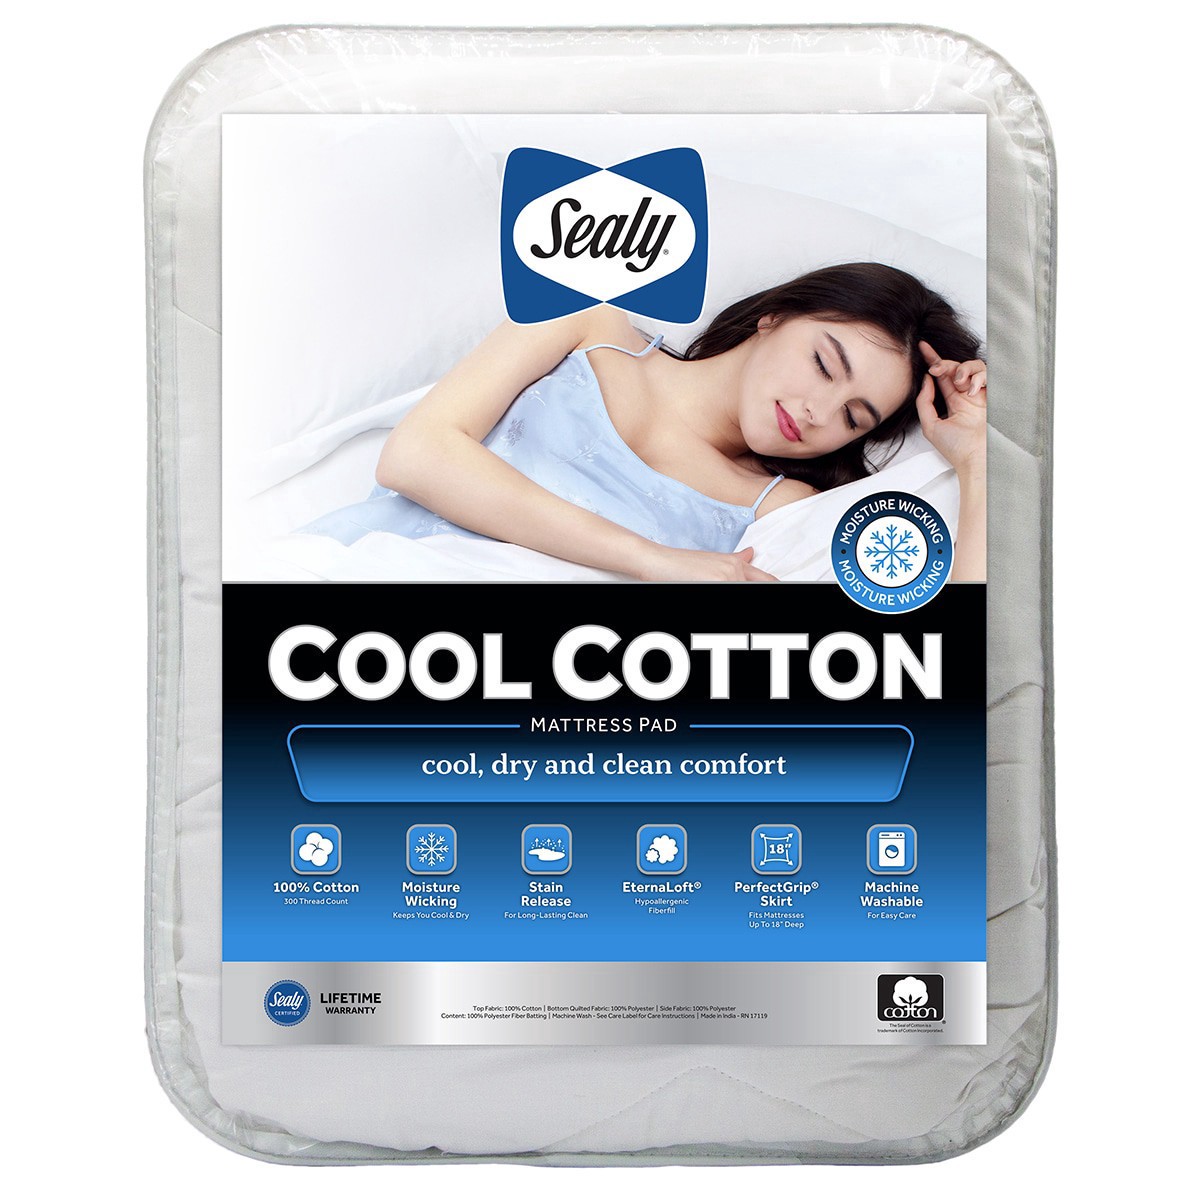 slide 1 of 17, Sealy Cool Cotton Moisture Wicking Mattress Pad, Queen, queen size